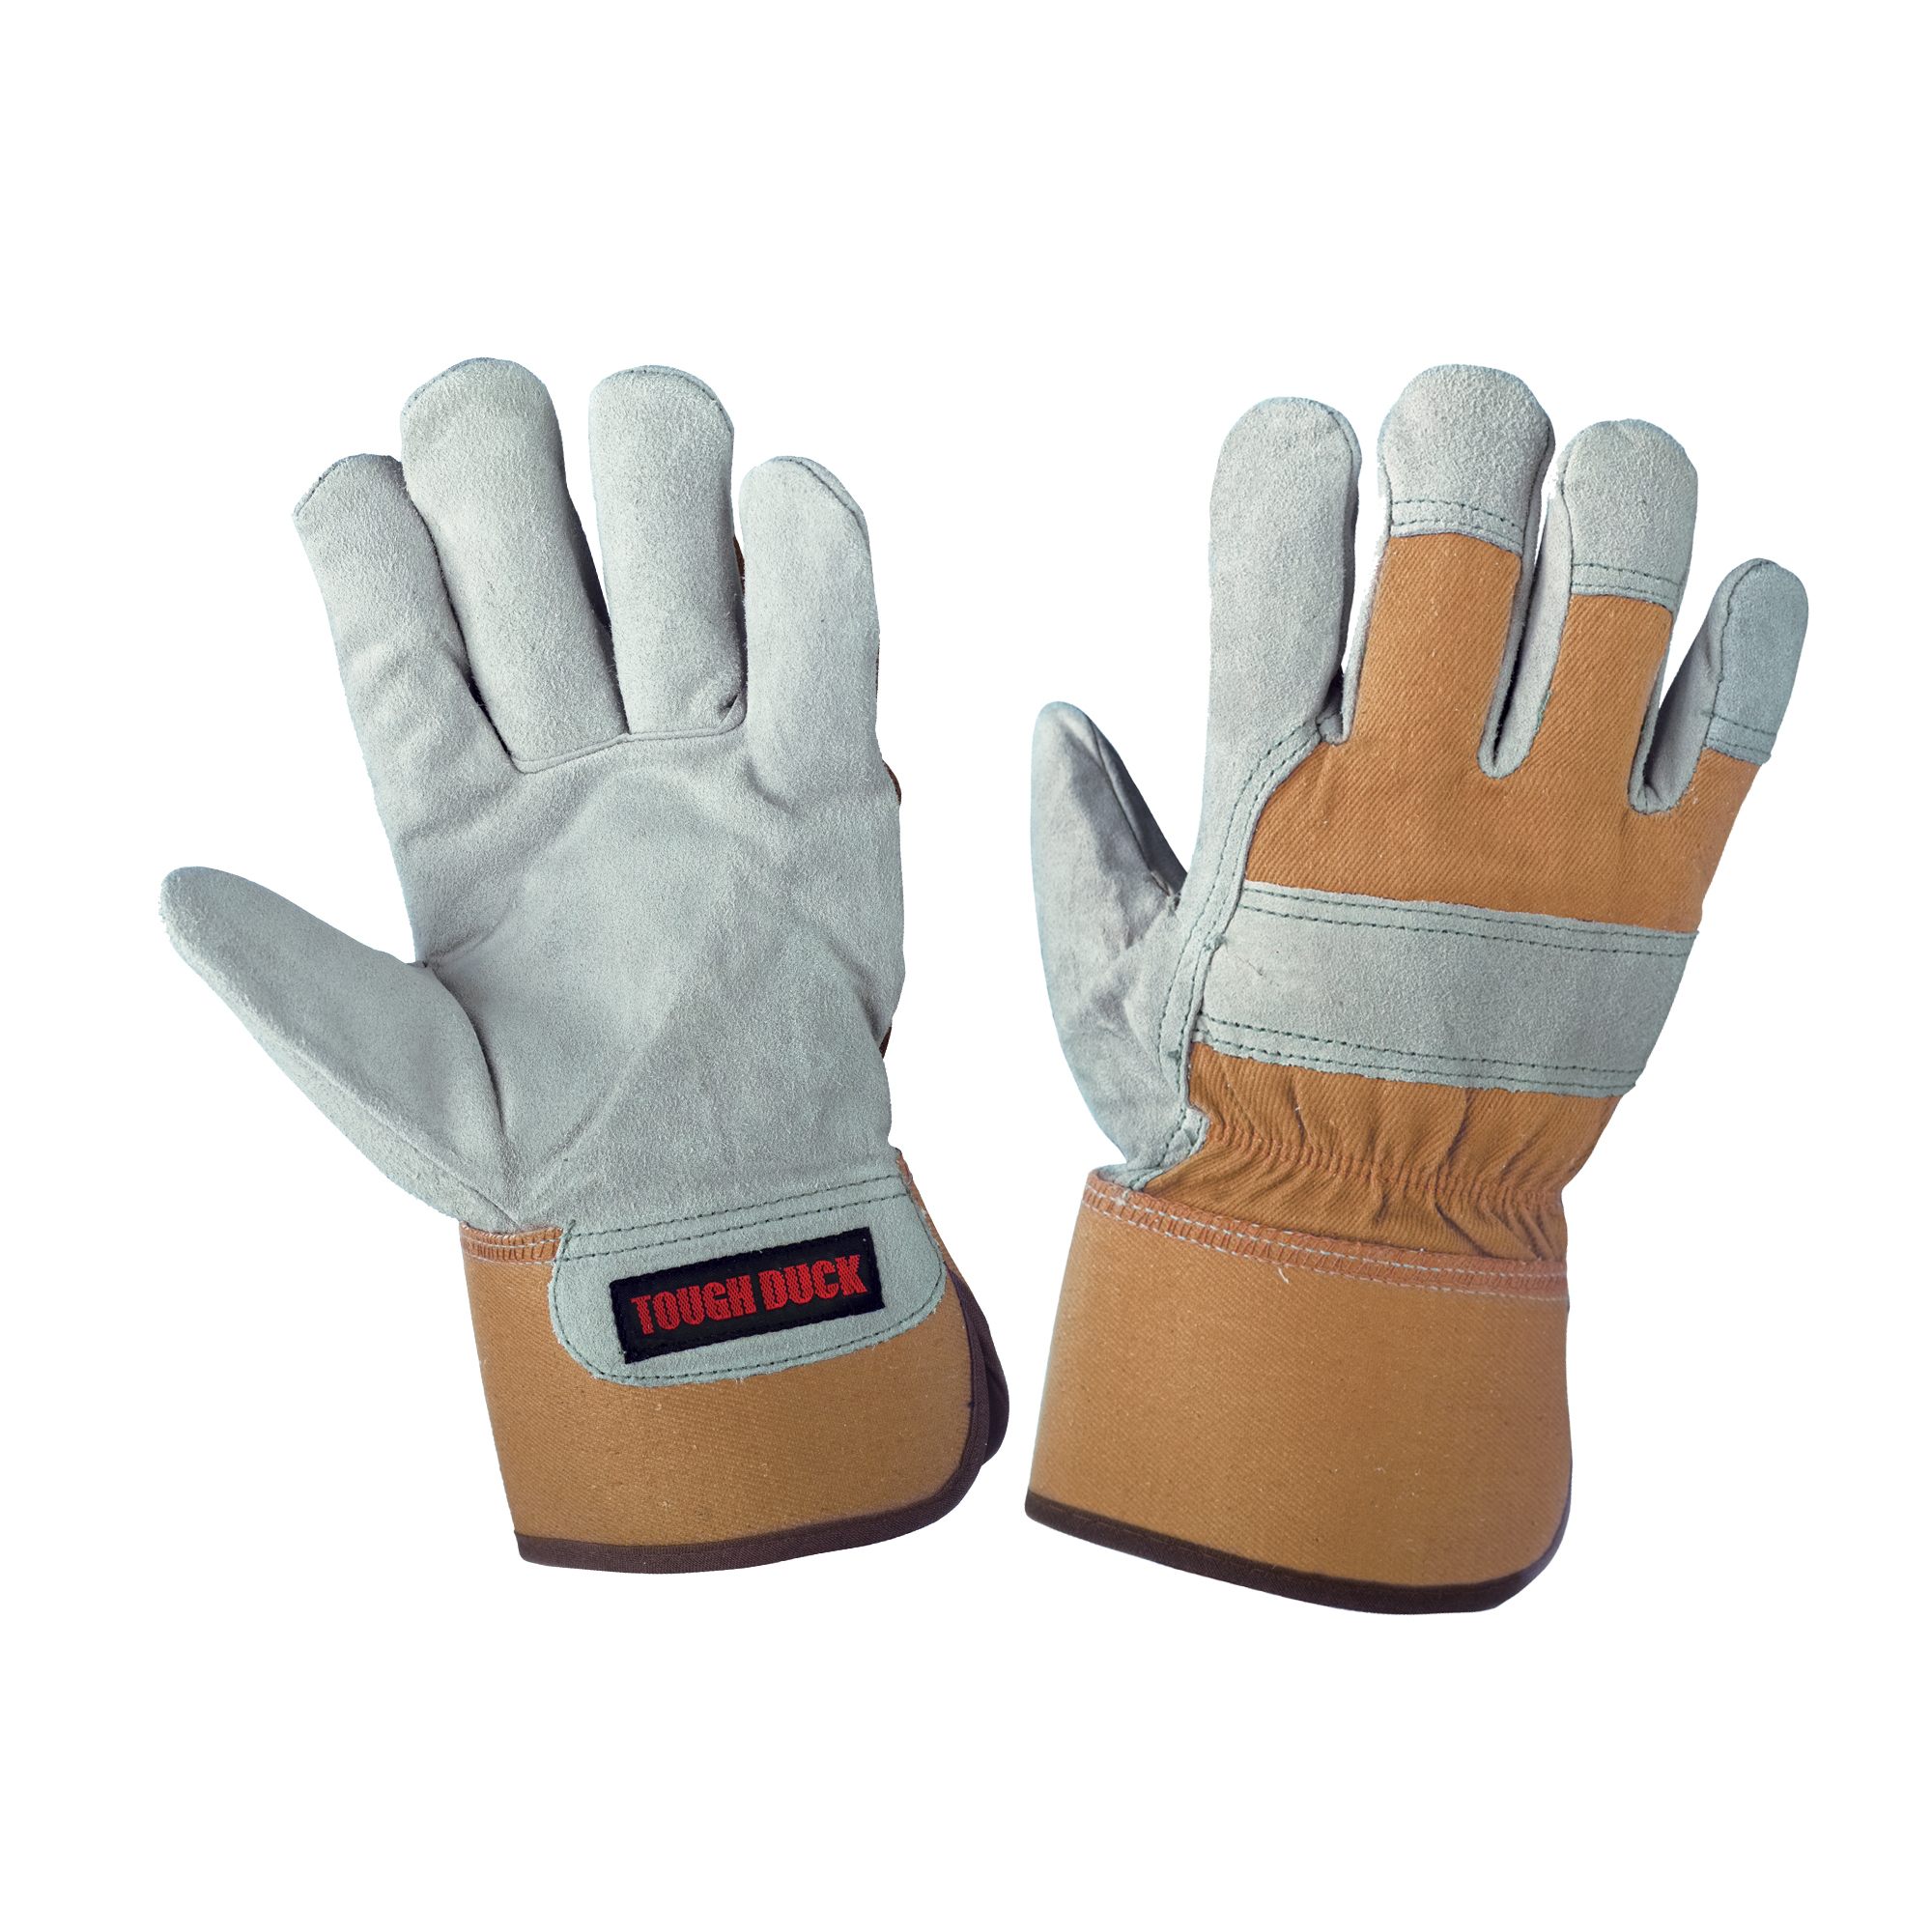 Tough Duck, Cow Split Palm Lined Fitter Glove, Size L, Color Brown, Included (qty.) 1 Model GI5606